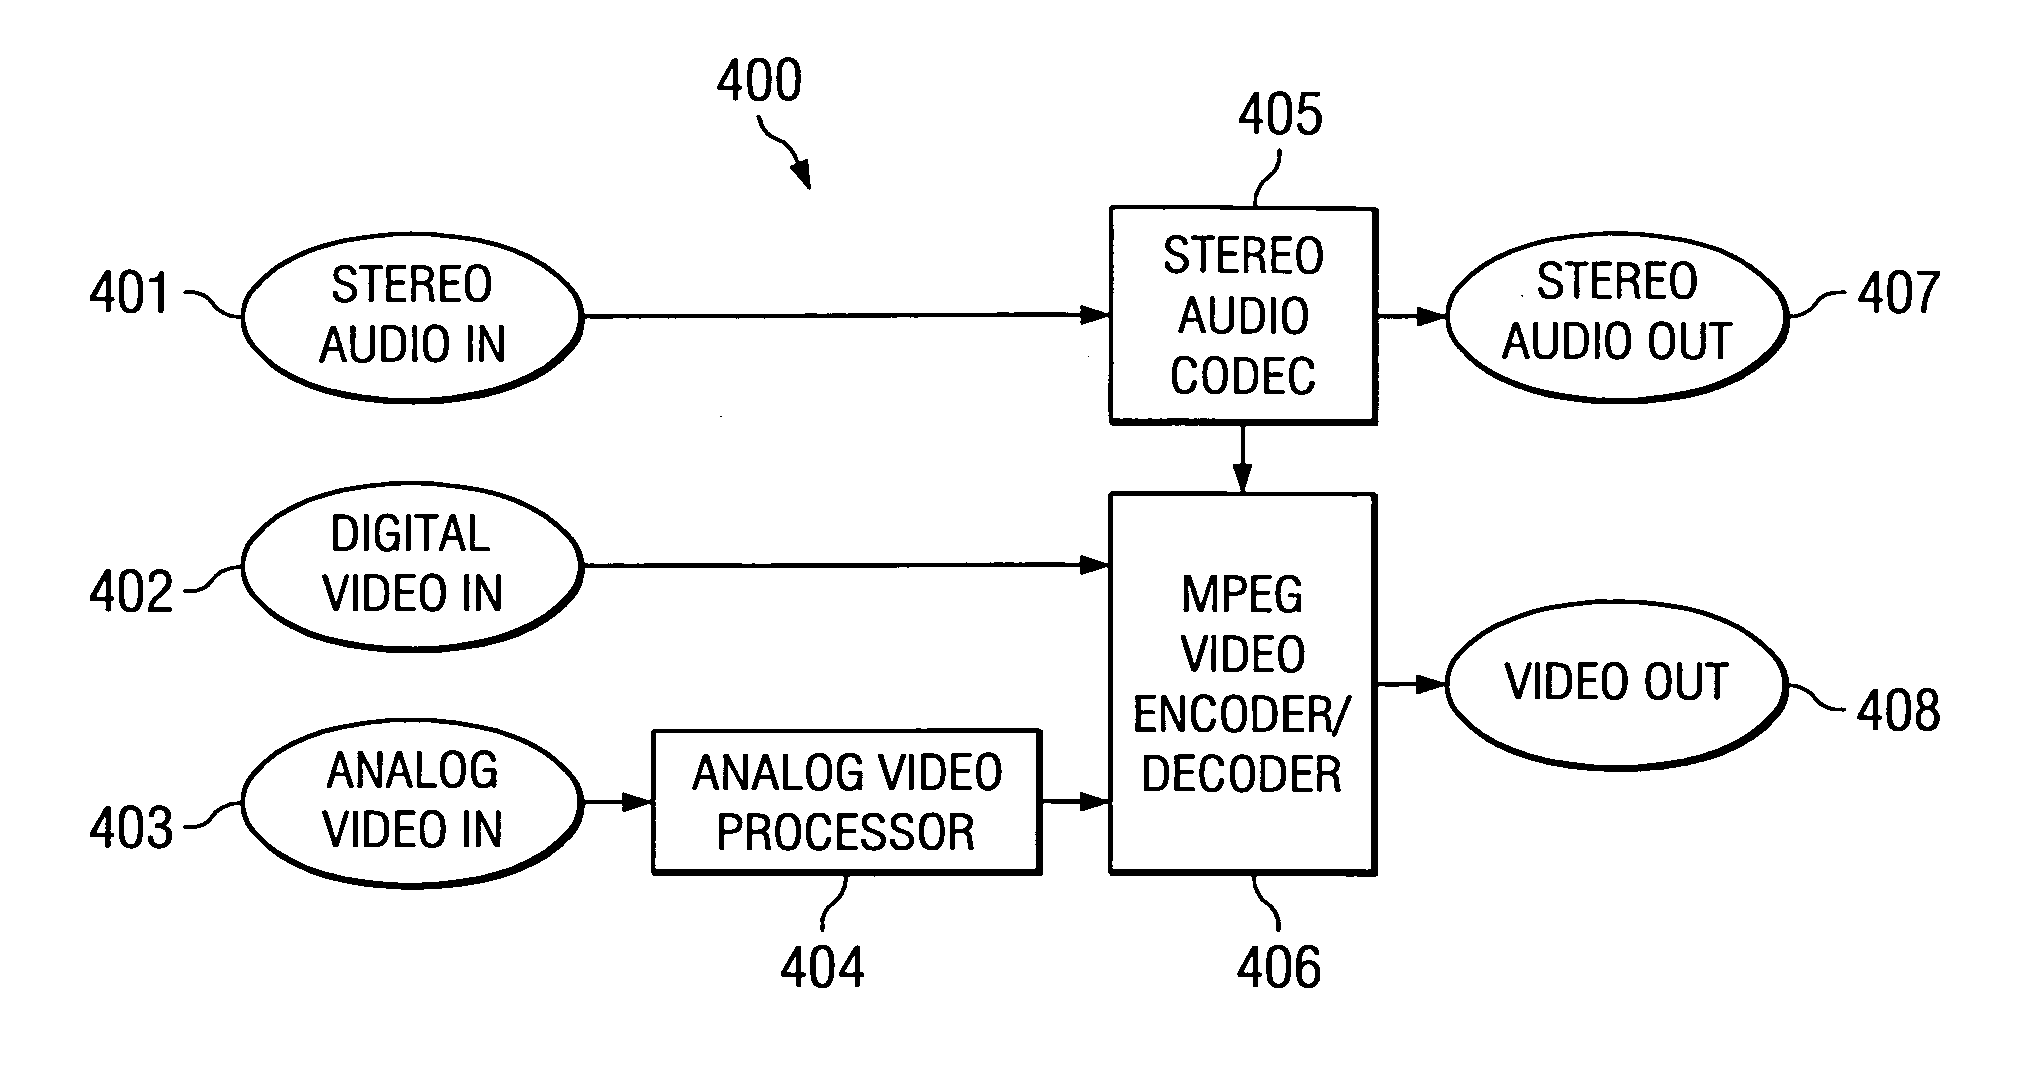 Dynamic pre-filter control with subjective noise detector for video compression